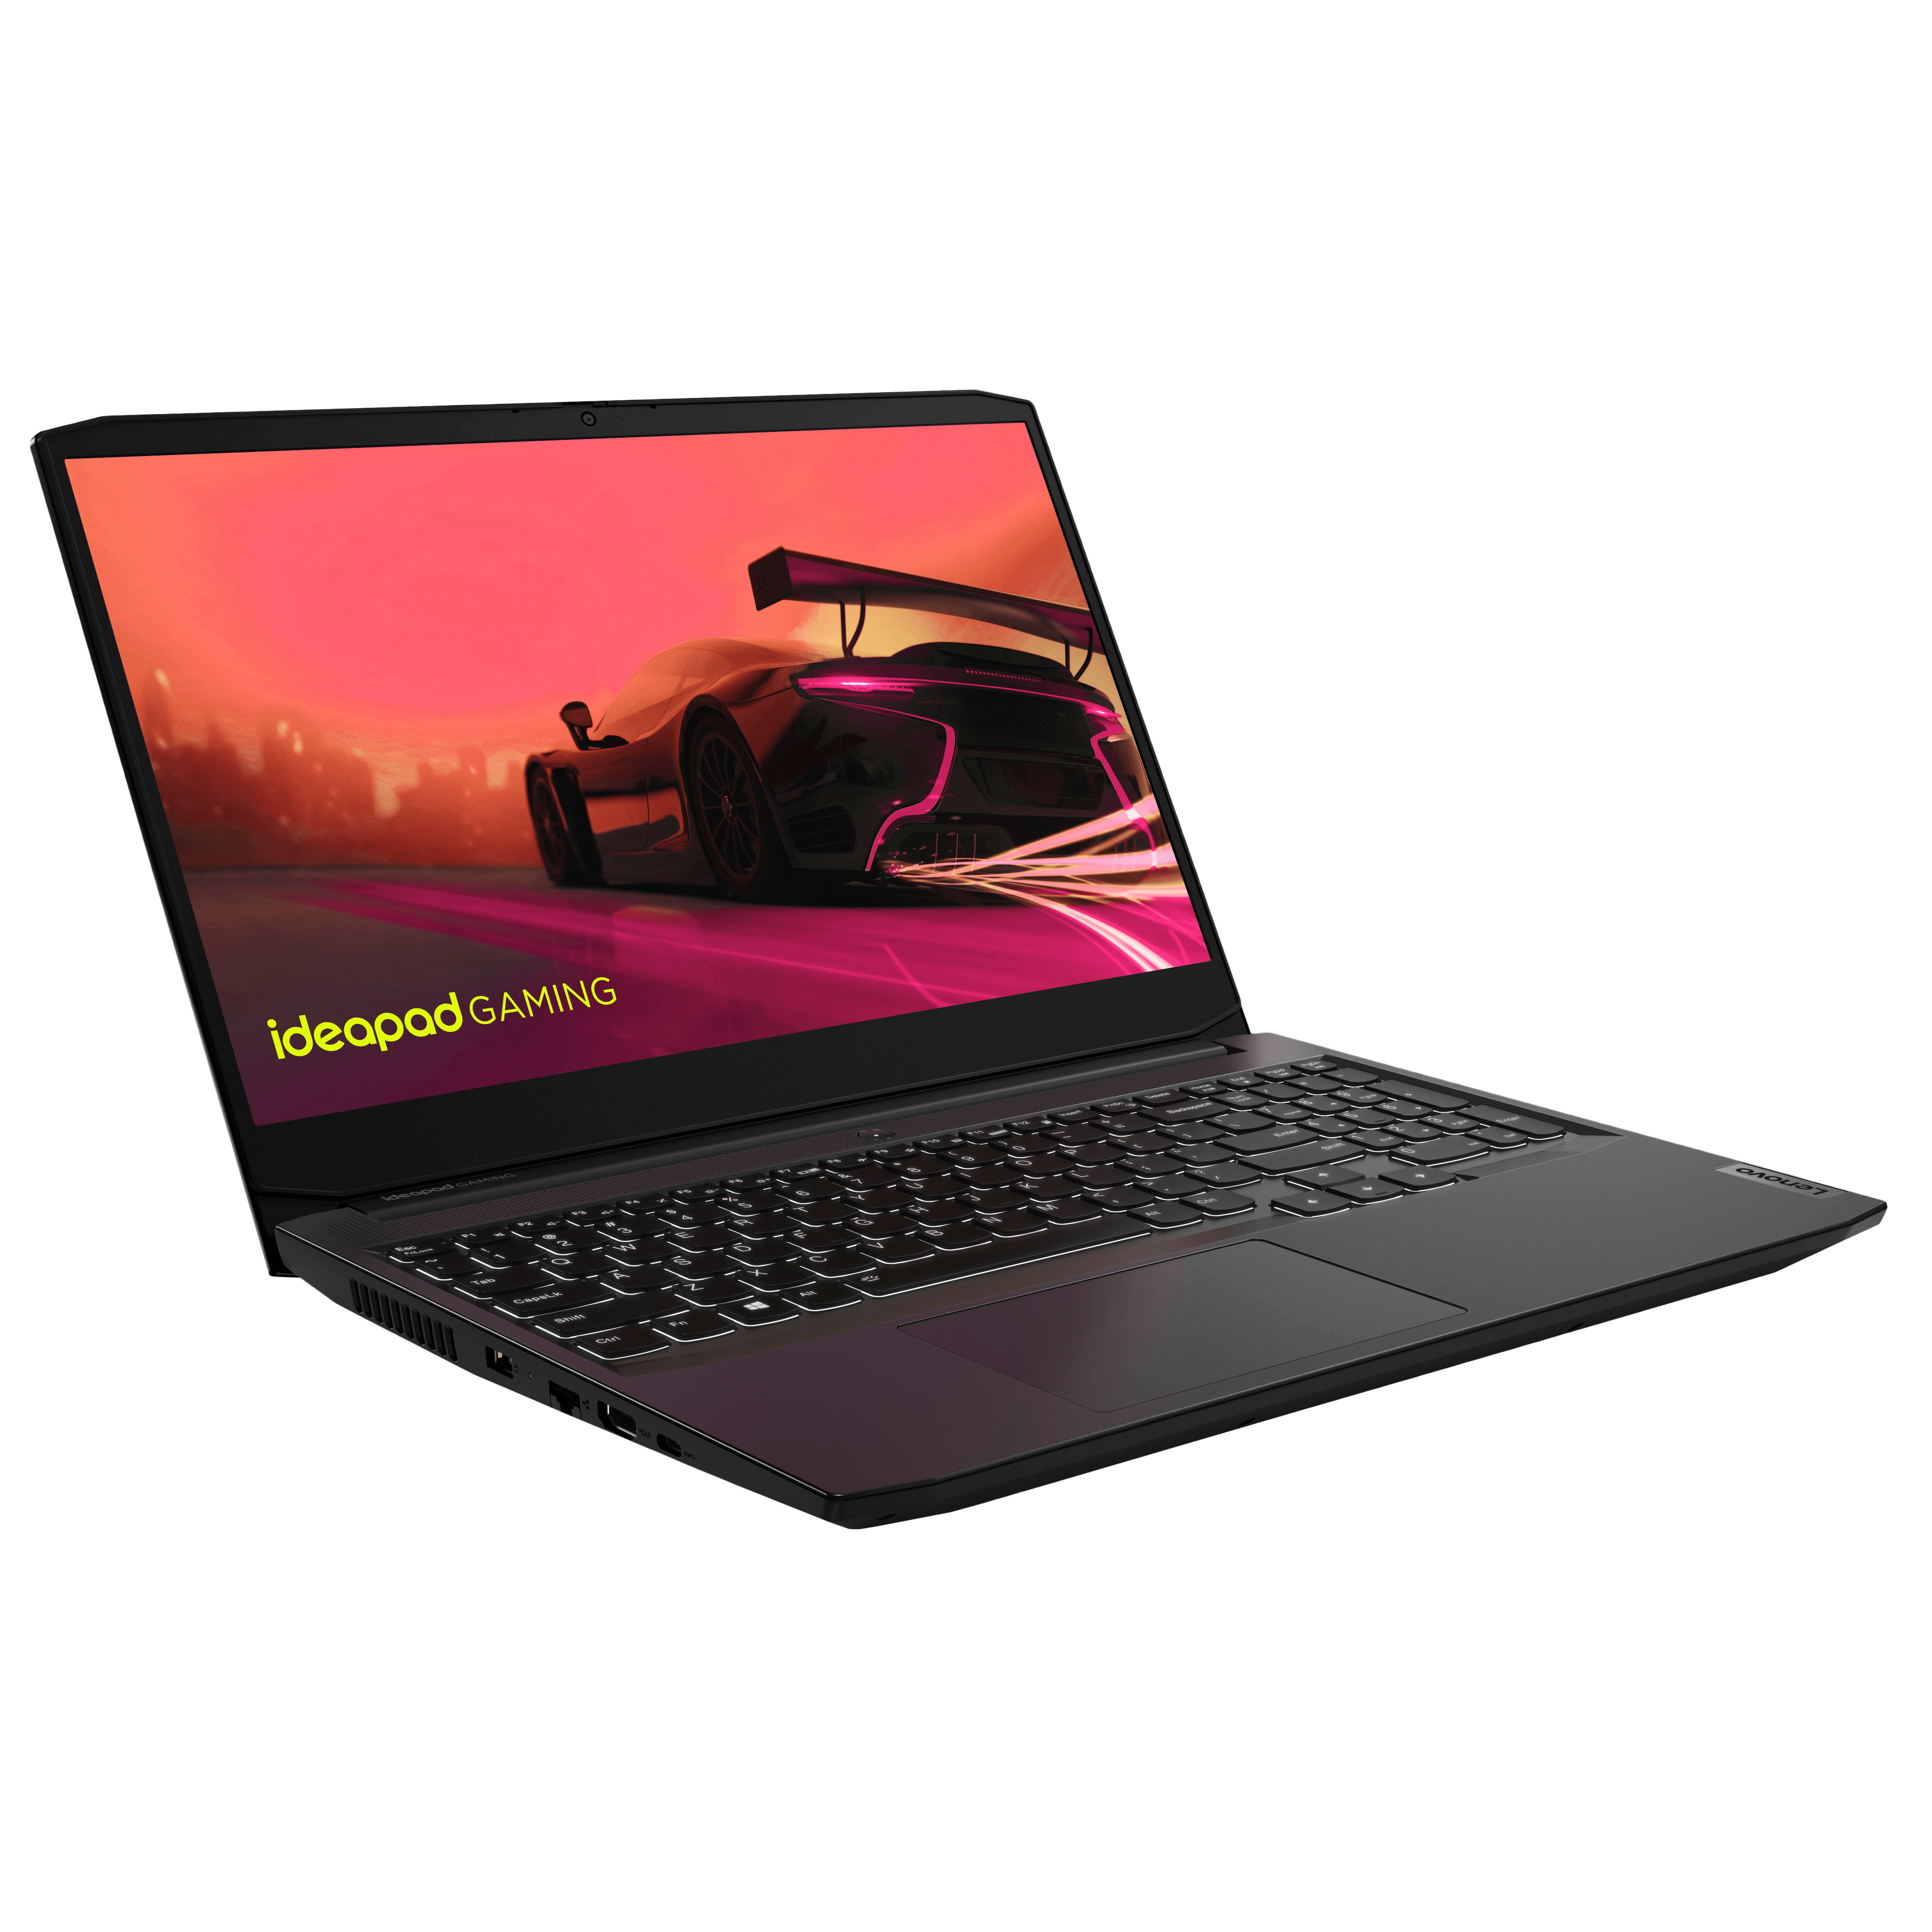 Best Rated Gaming Laptops ideapad gaming 3